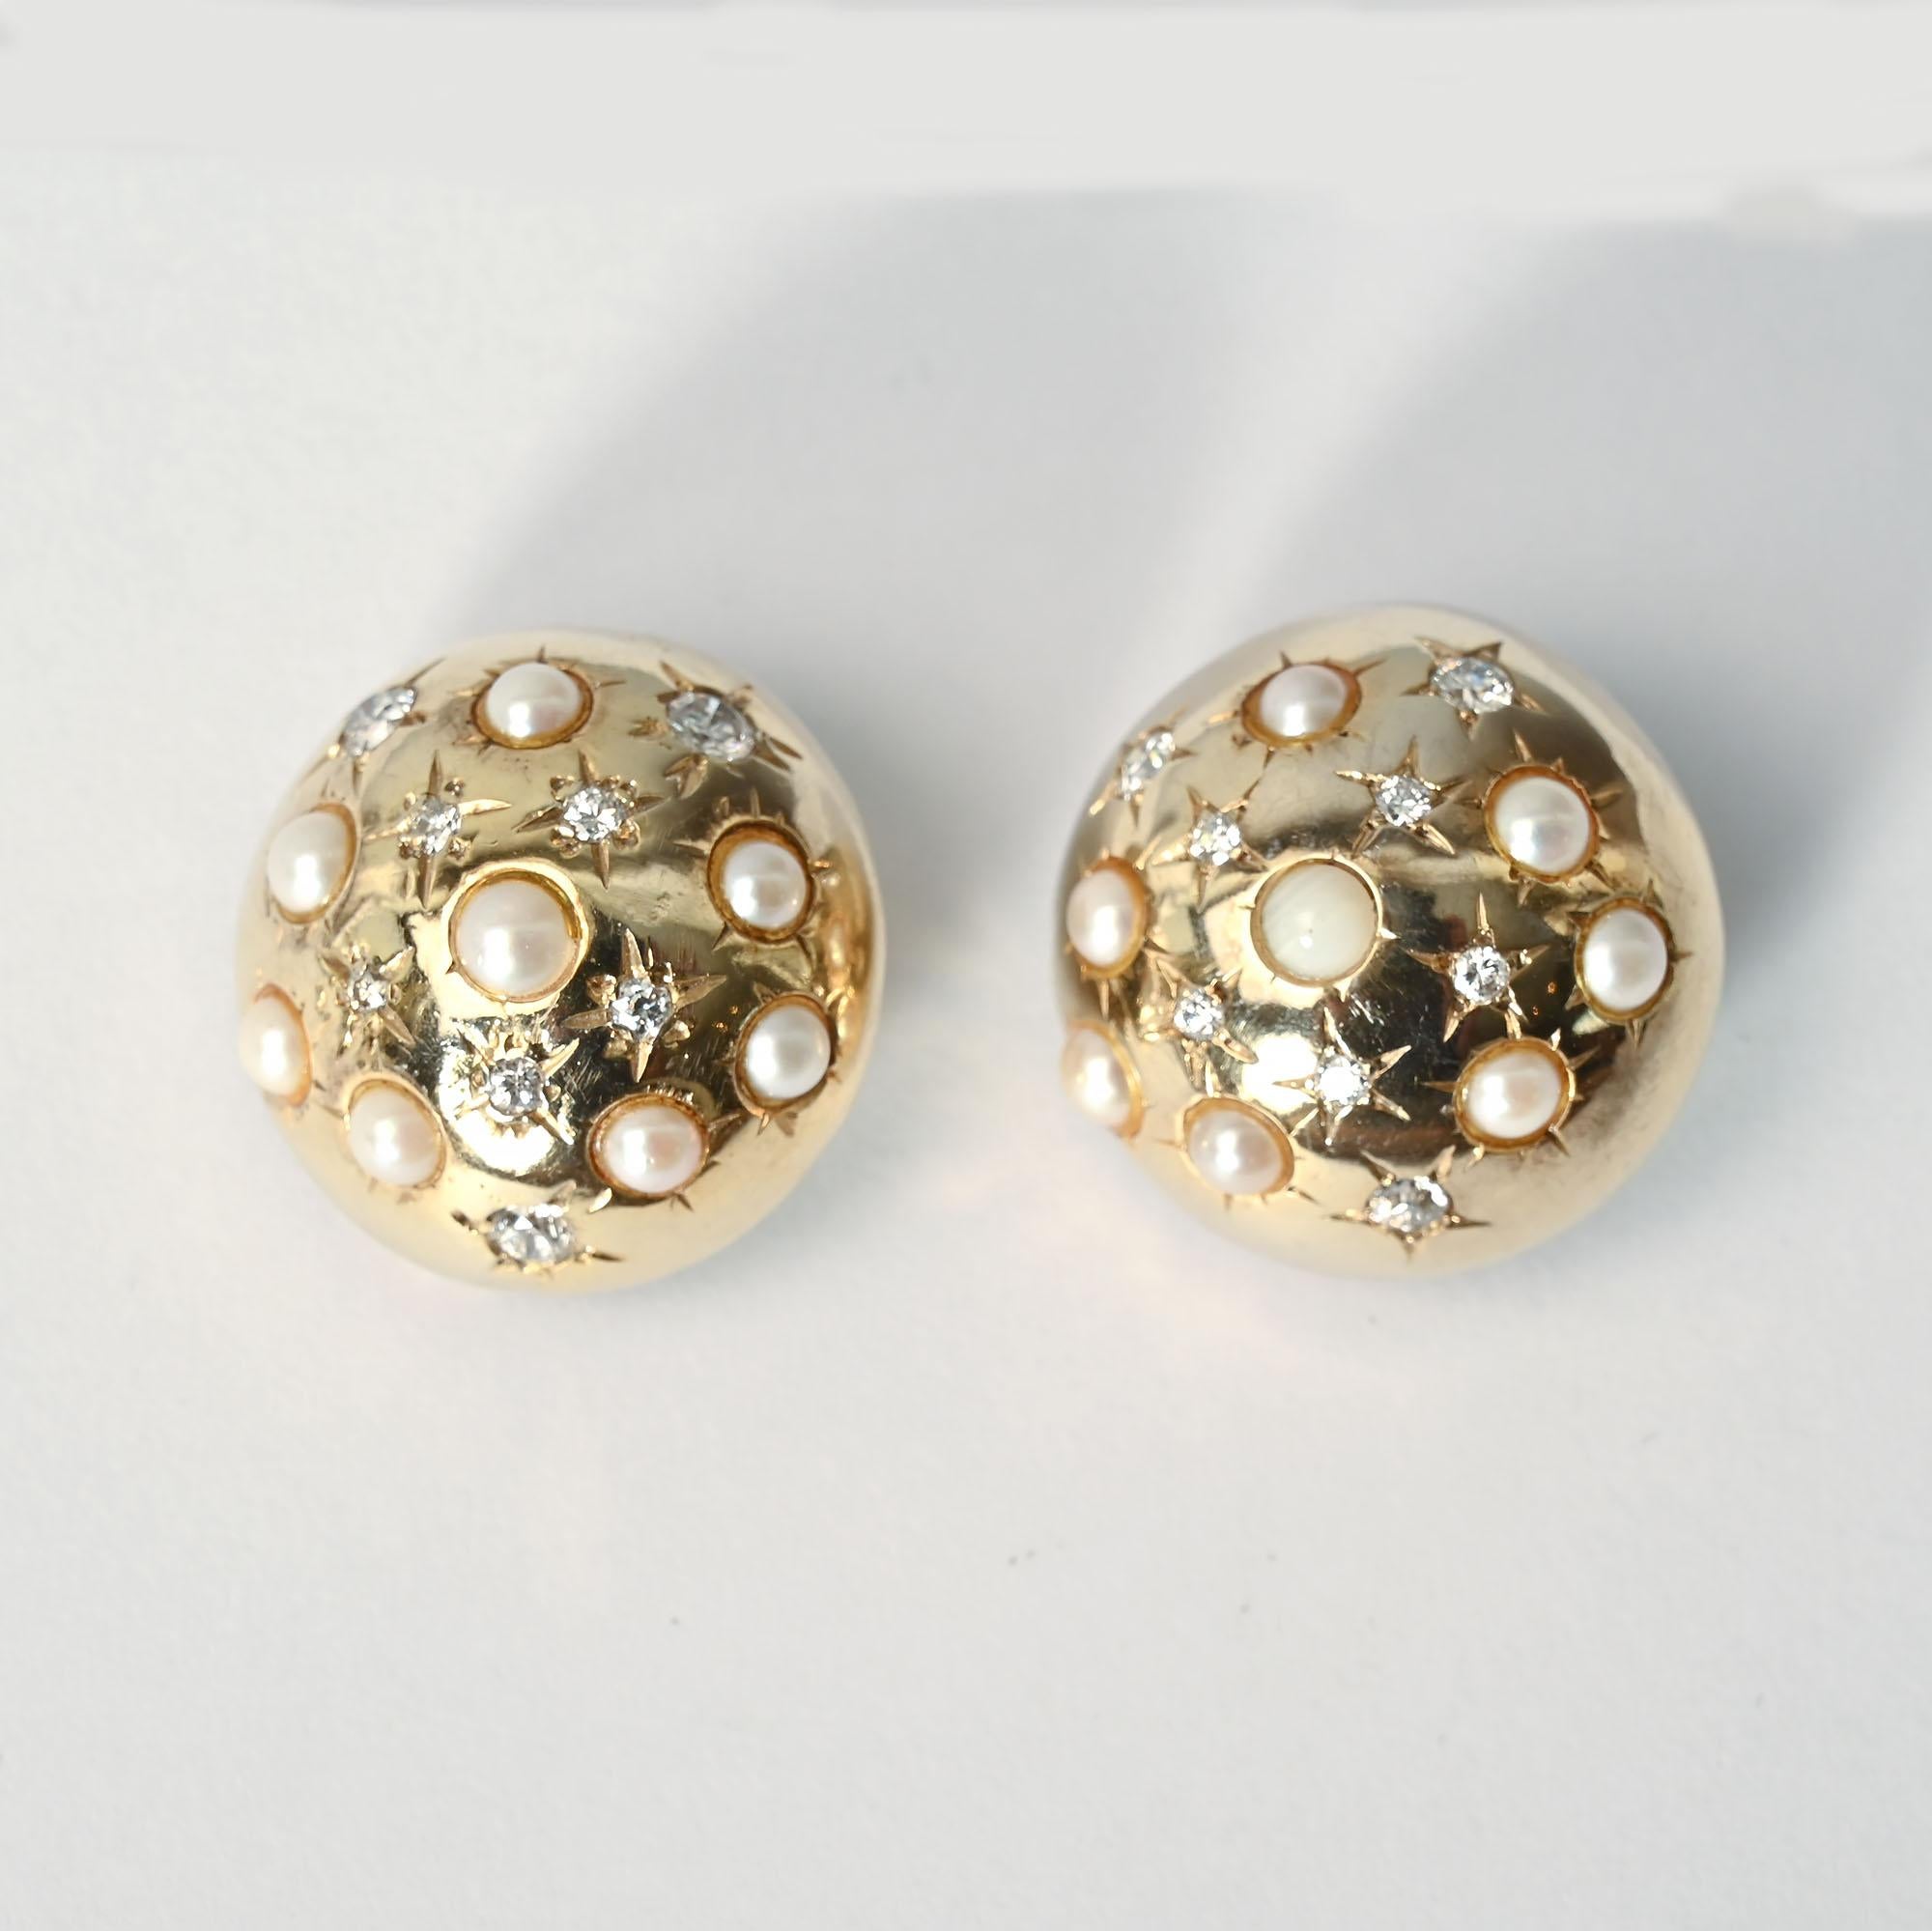 The round 14 karat gold earrings are studded with pearls and diamonds. The diamonds are set in a five point star, popular in the 1940's.
The earrings are 15/16